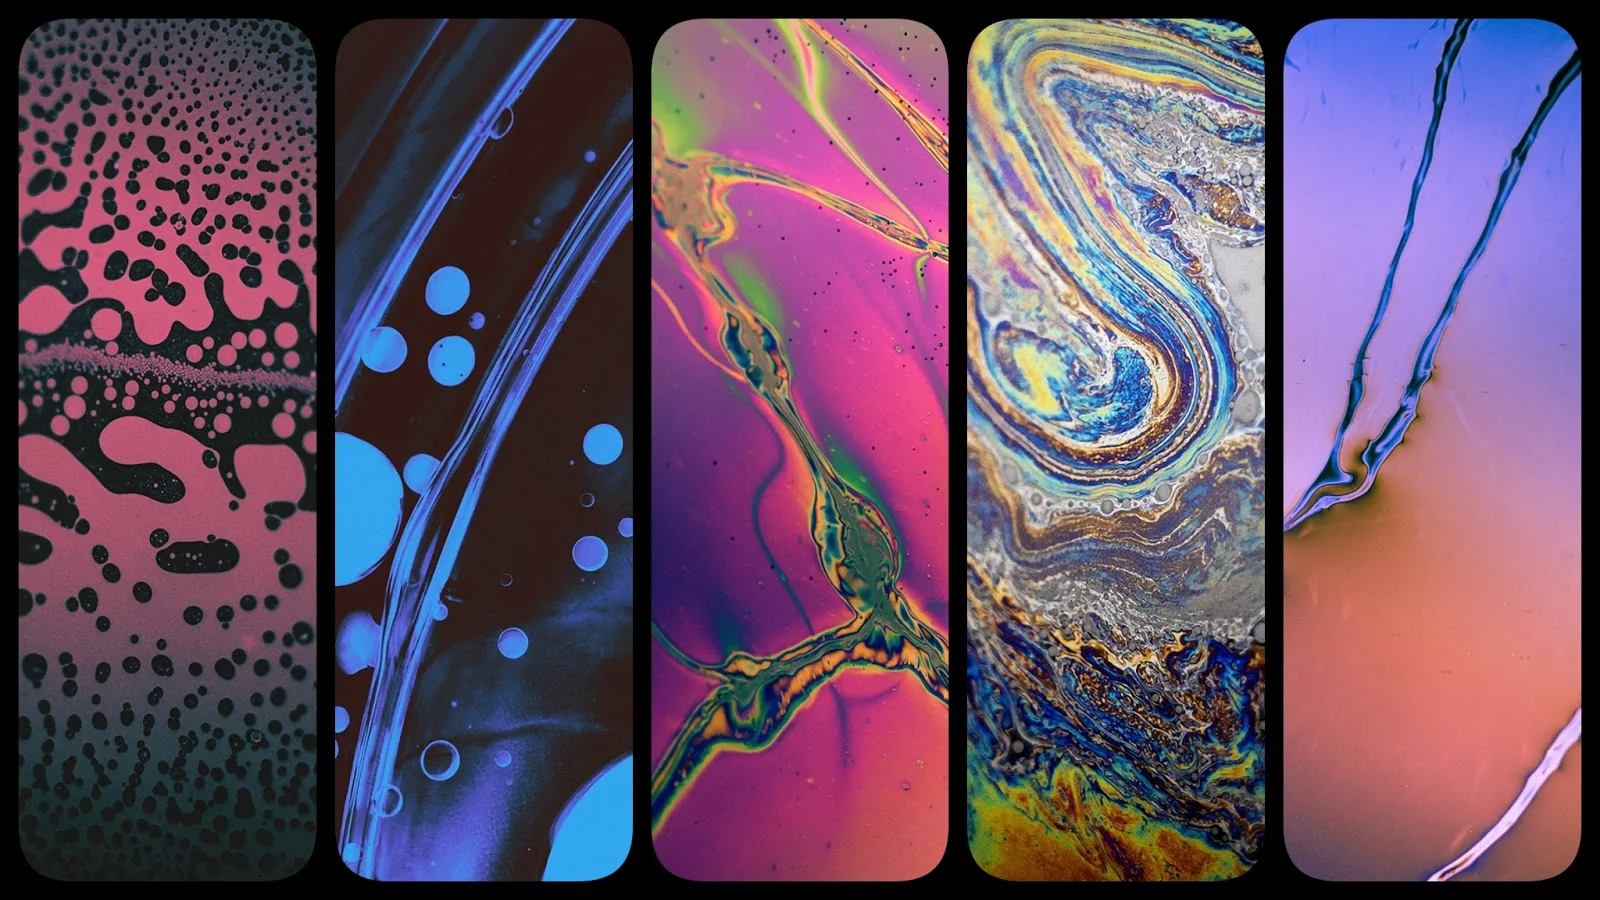 New abstract phone wallpapers 720p